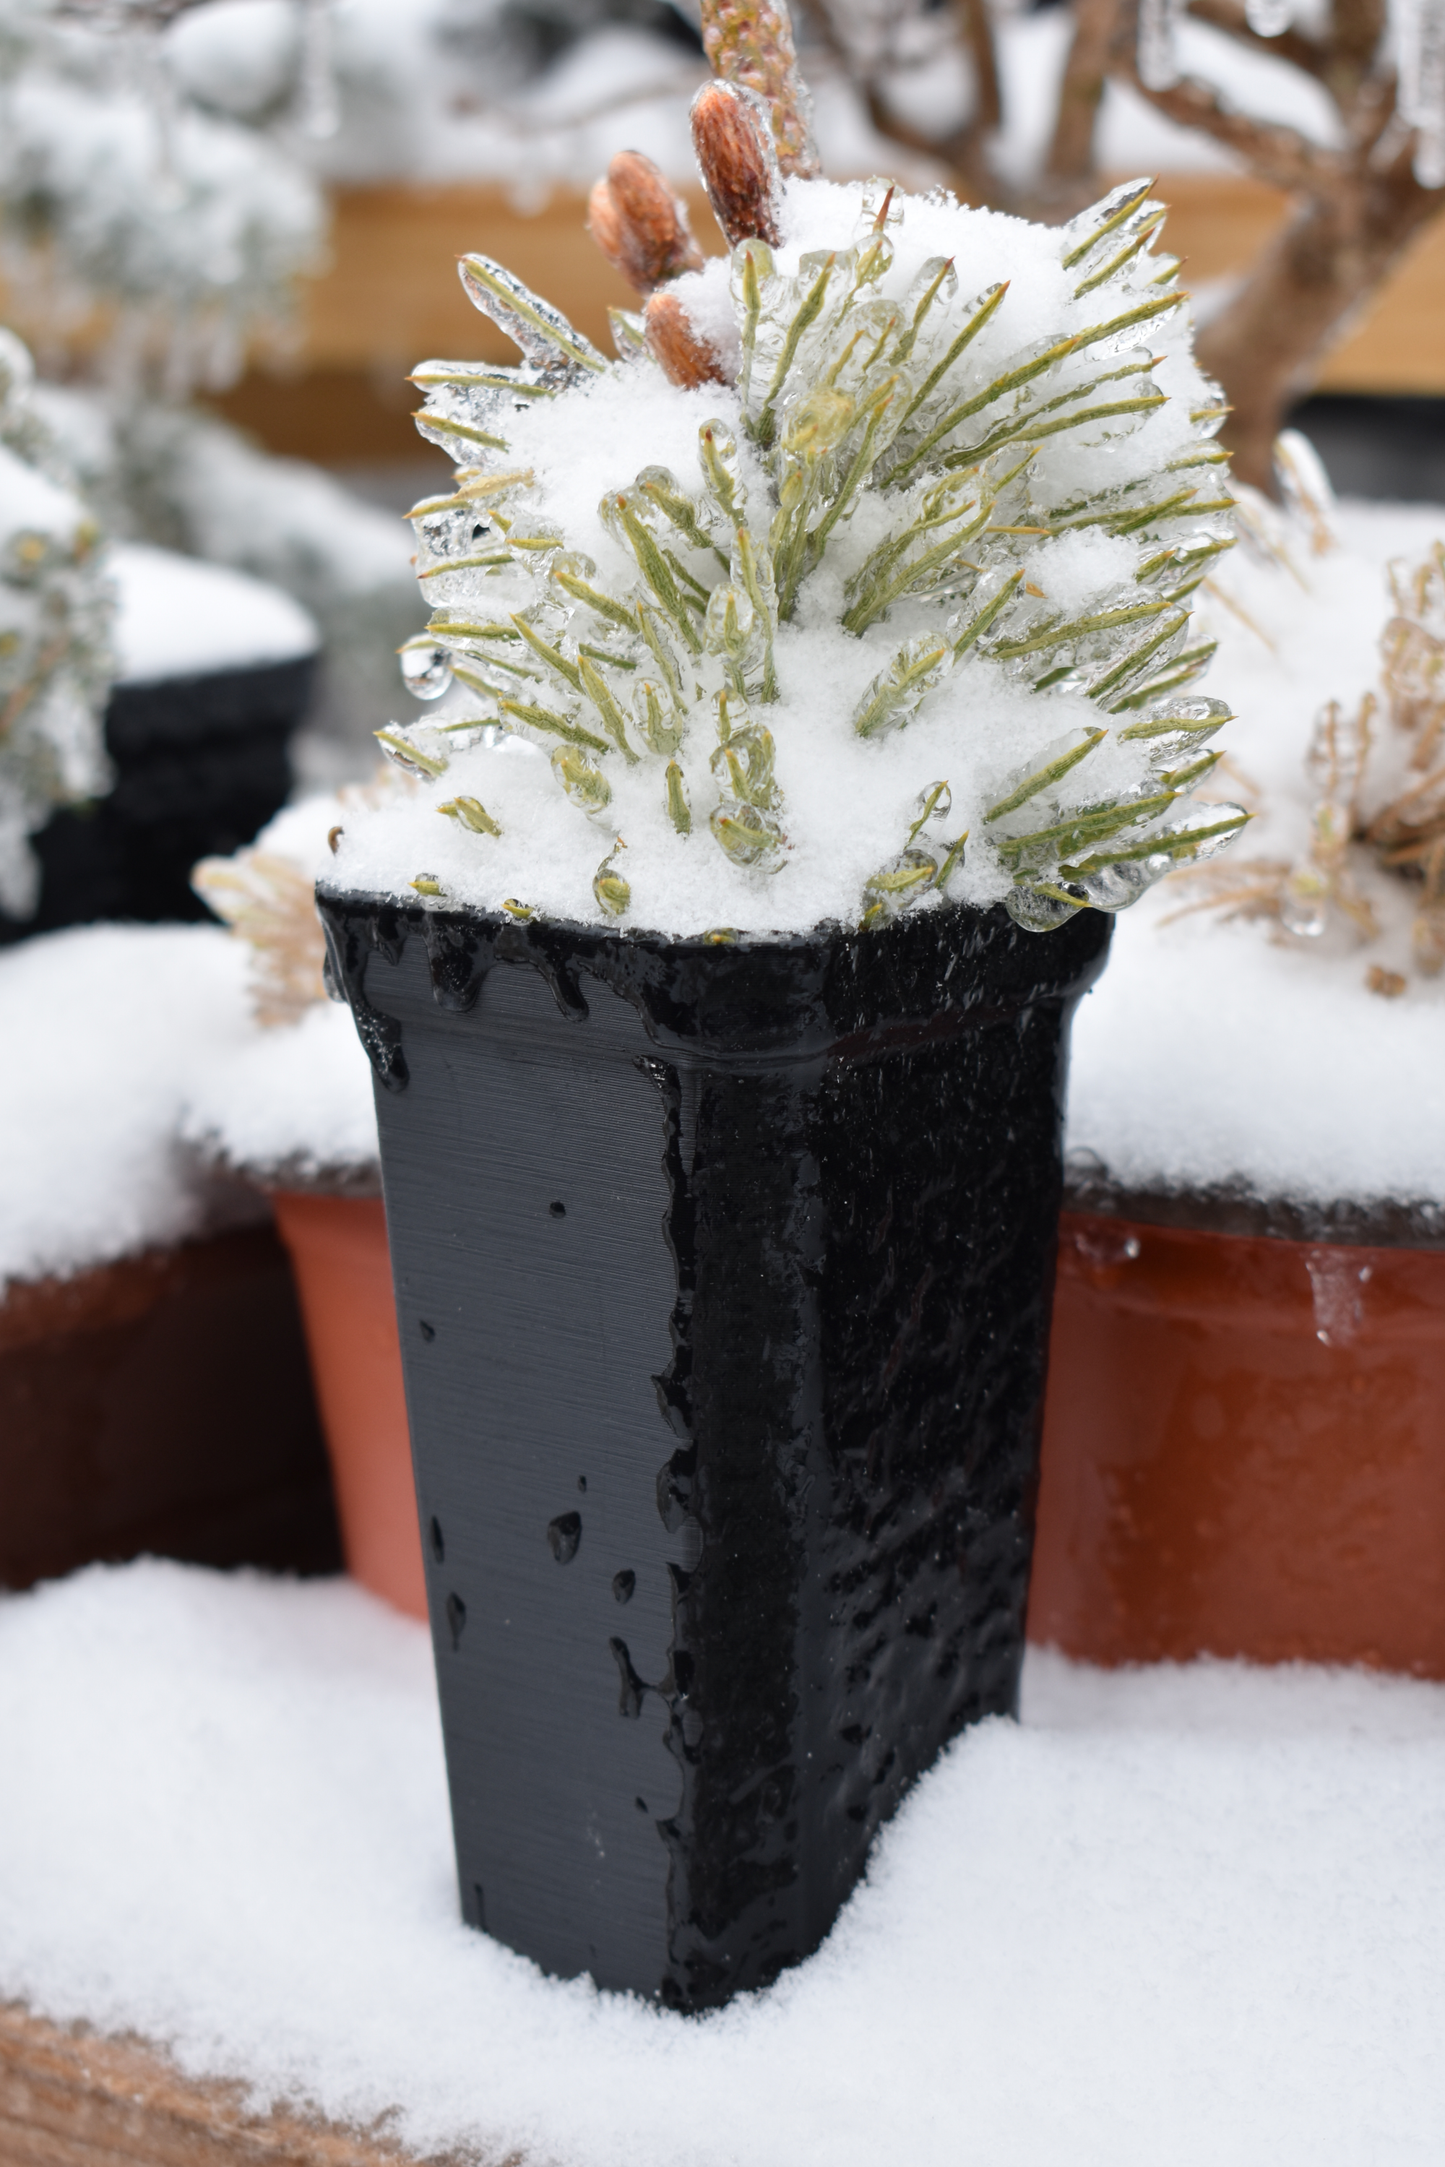 Small-&-Tall Plant Pots with Optional Trays, Outdoor Safe